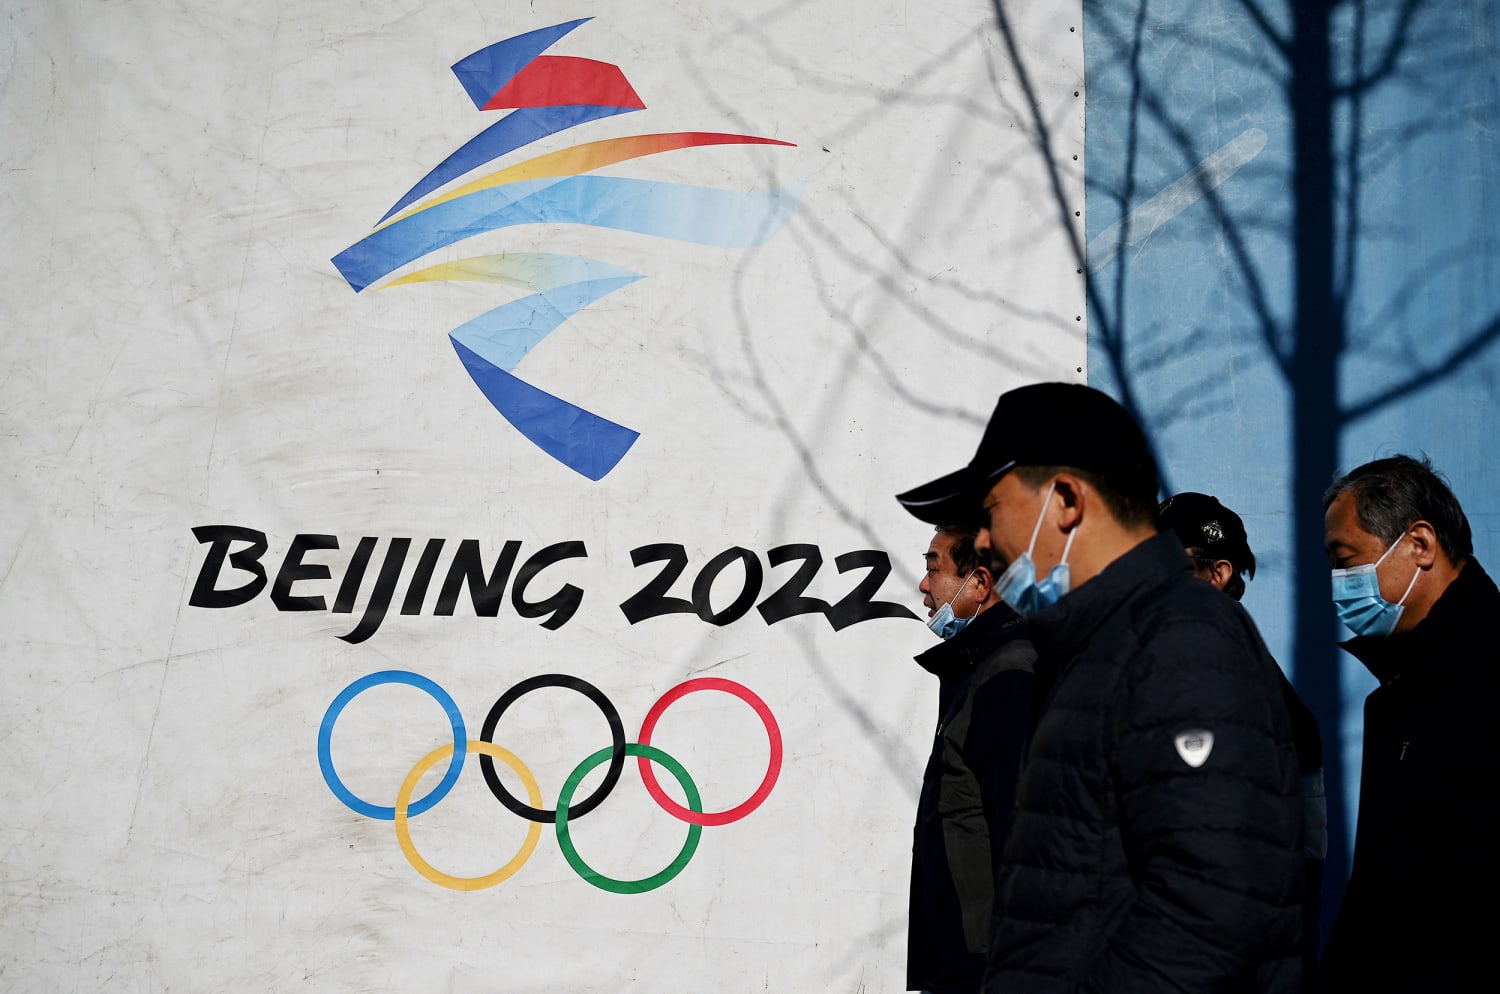 White House announces diplomatic boycott of Beijing Winter Olympics over human rights concerns